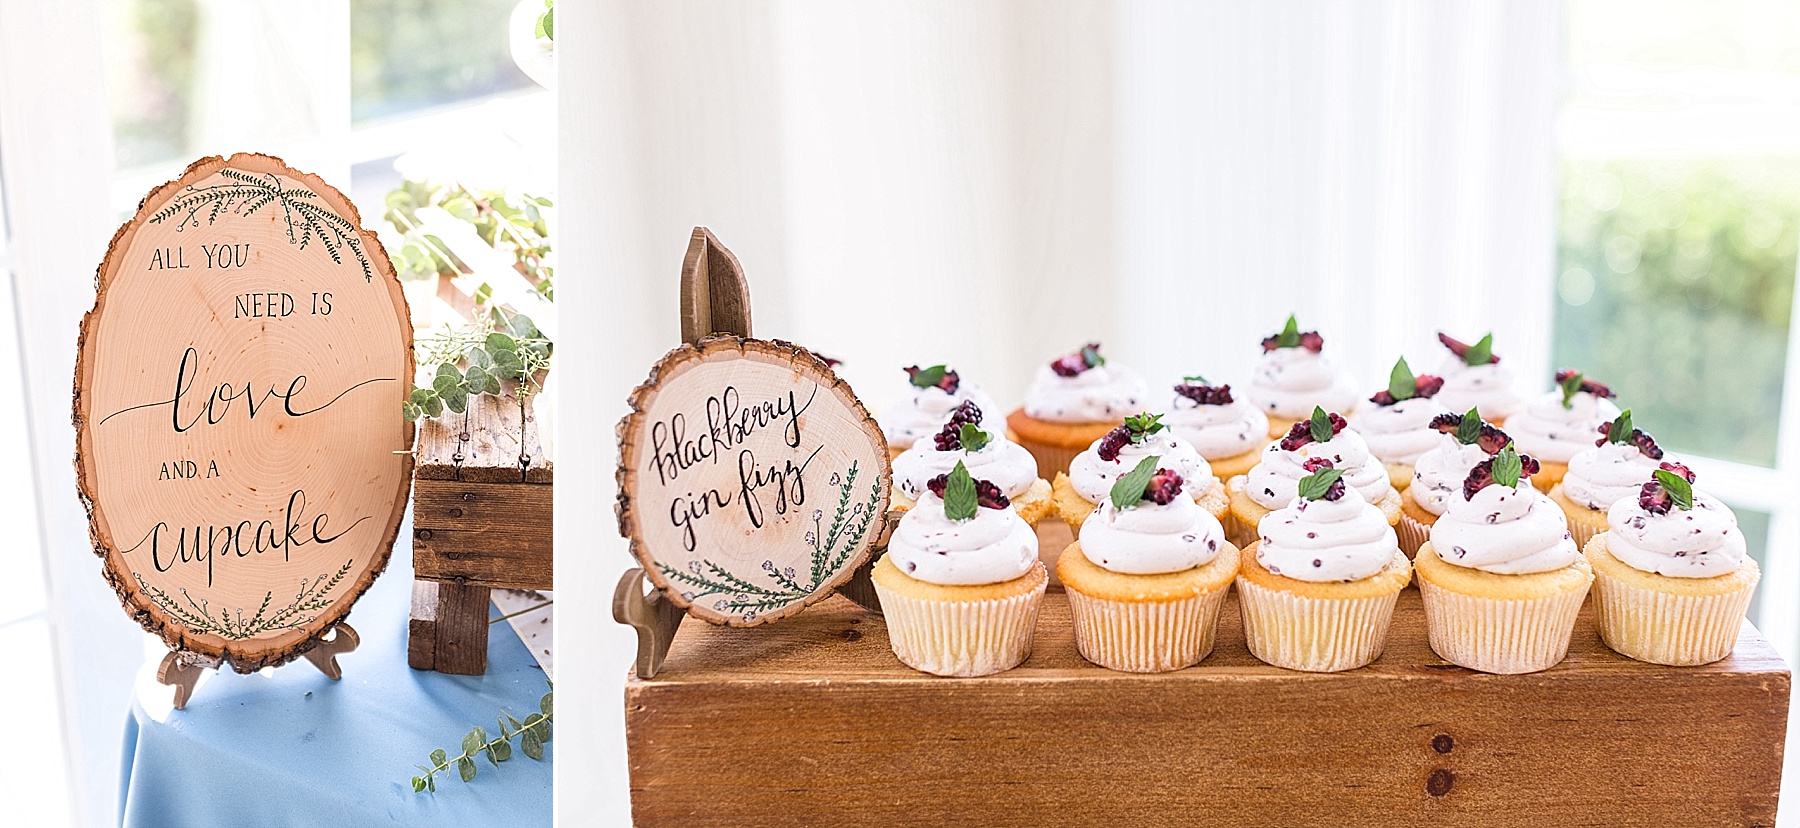 cocktail inspired wedding cupcakes photographed by Alexandra Mandato Photography